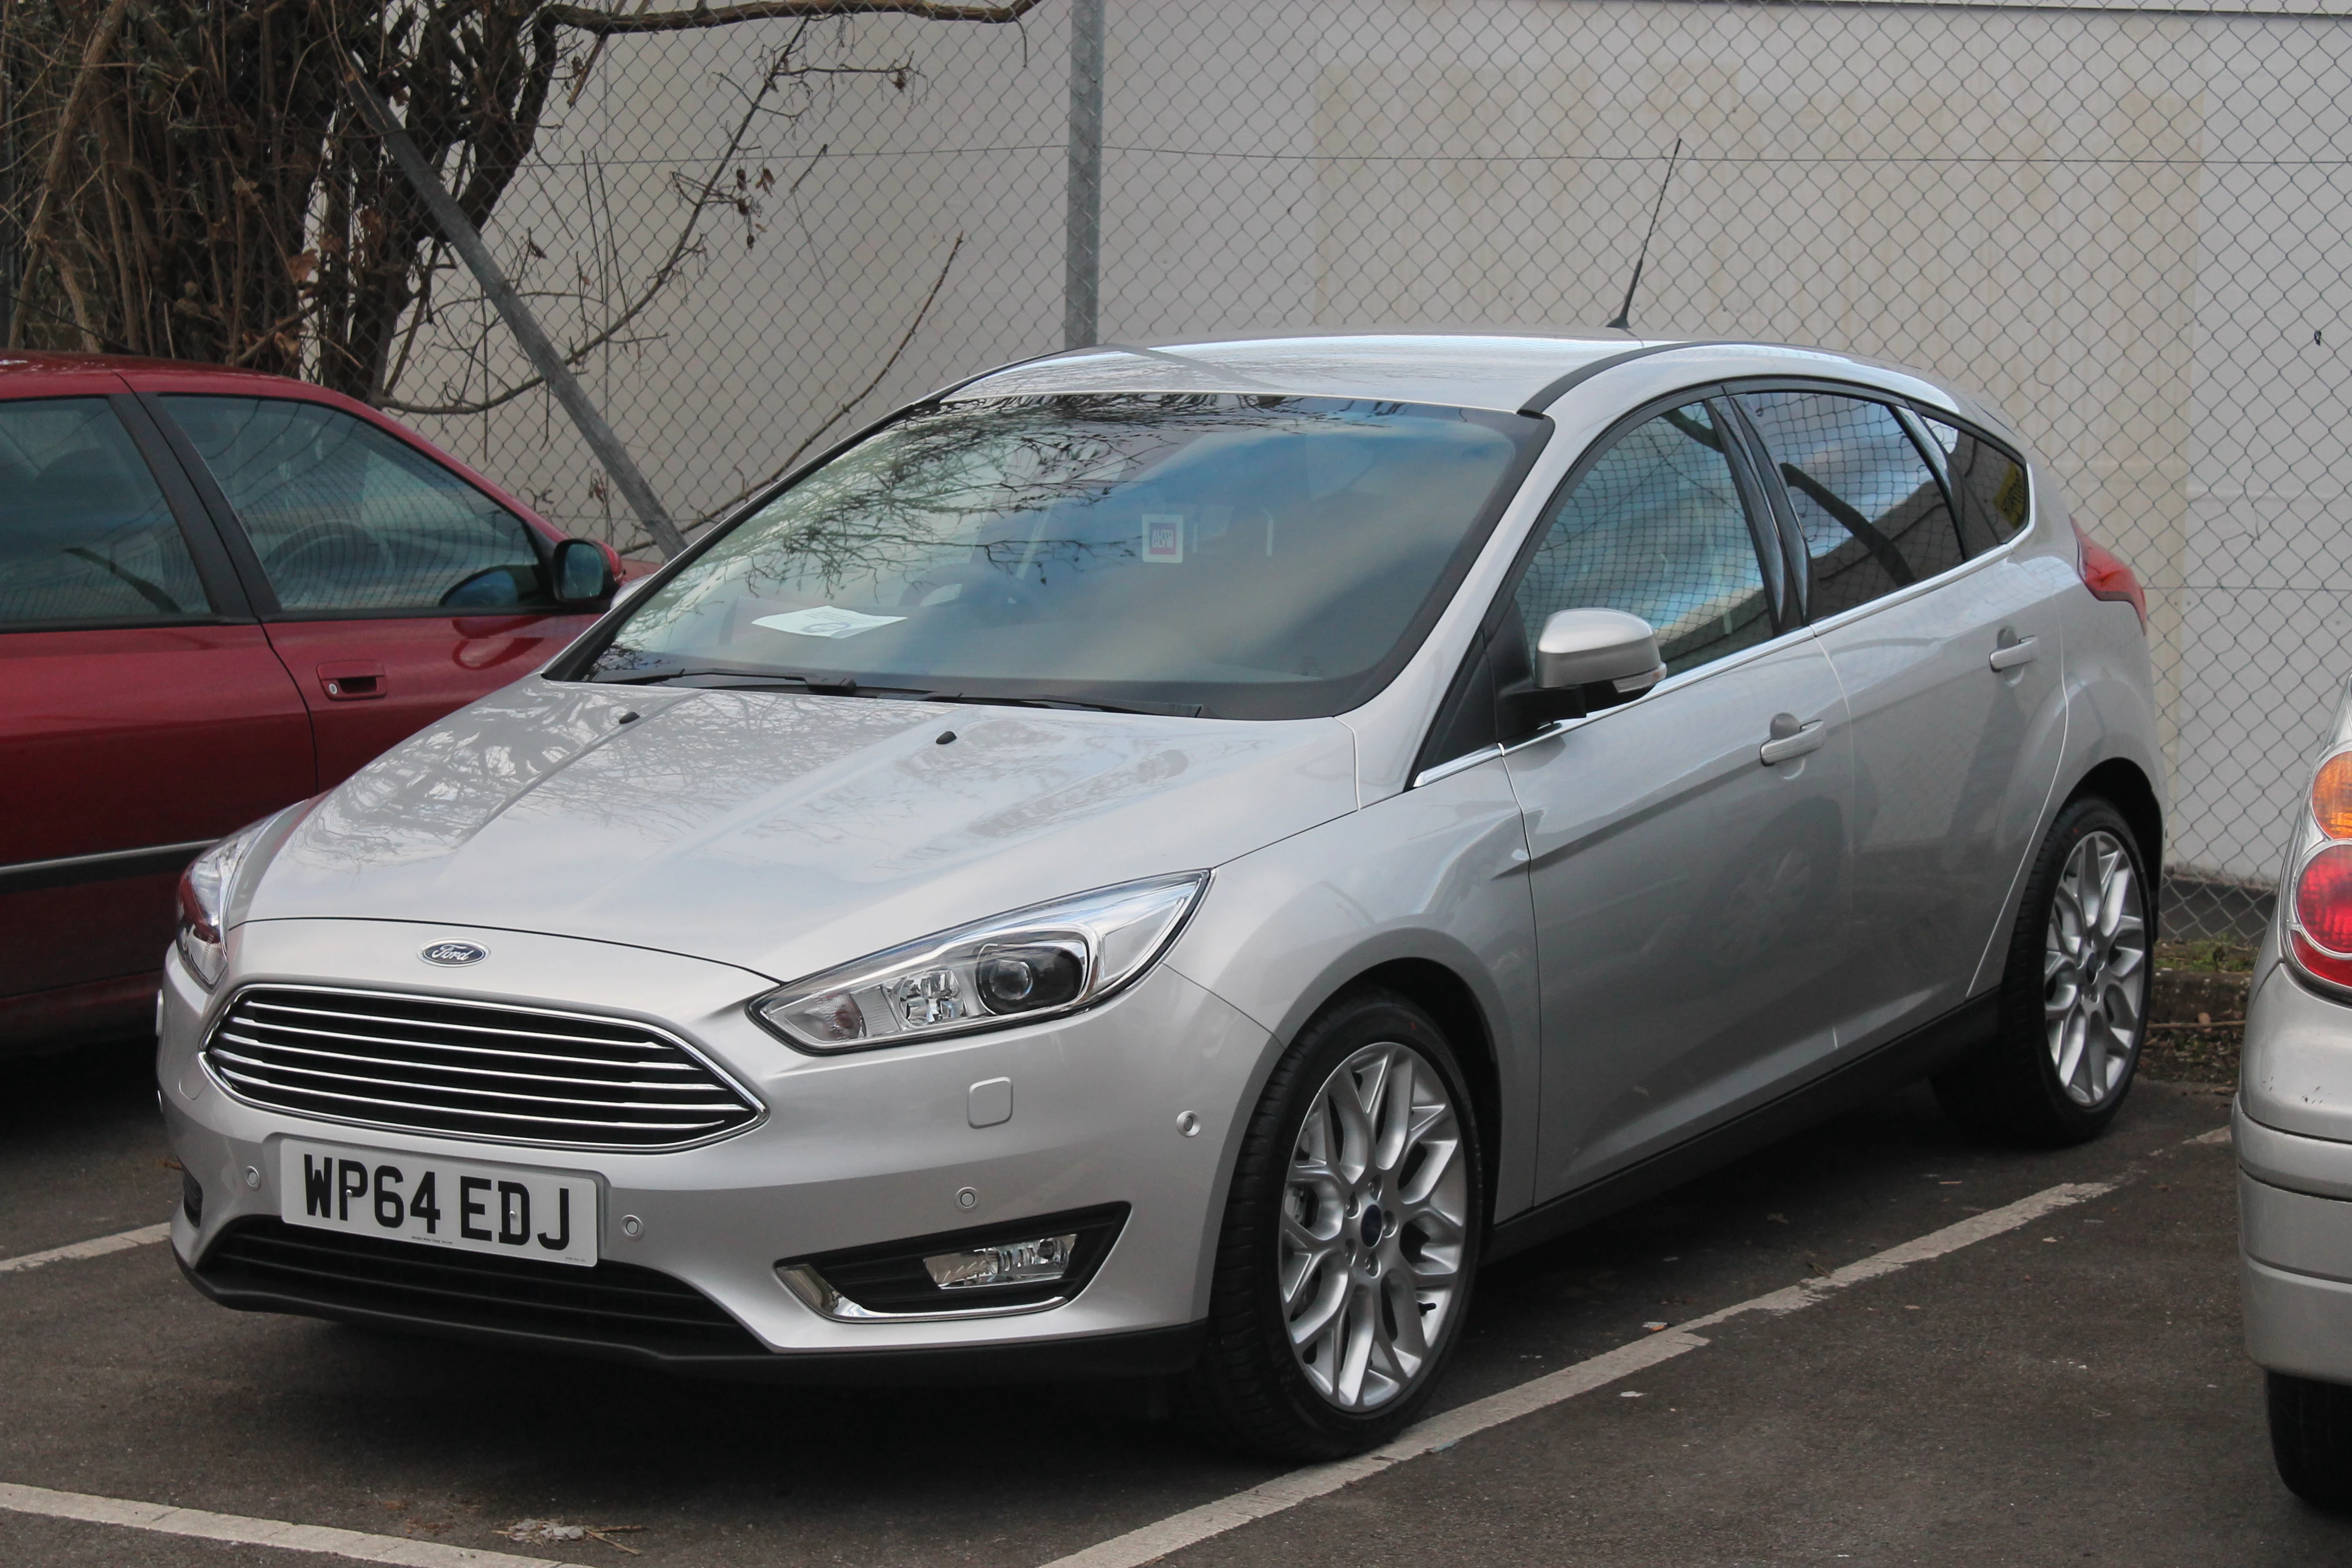 Brand new Ford Focus 1.0 Ecoboost (2014)